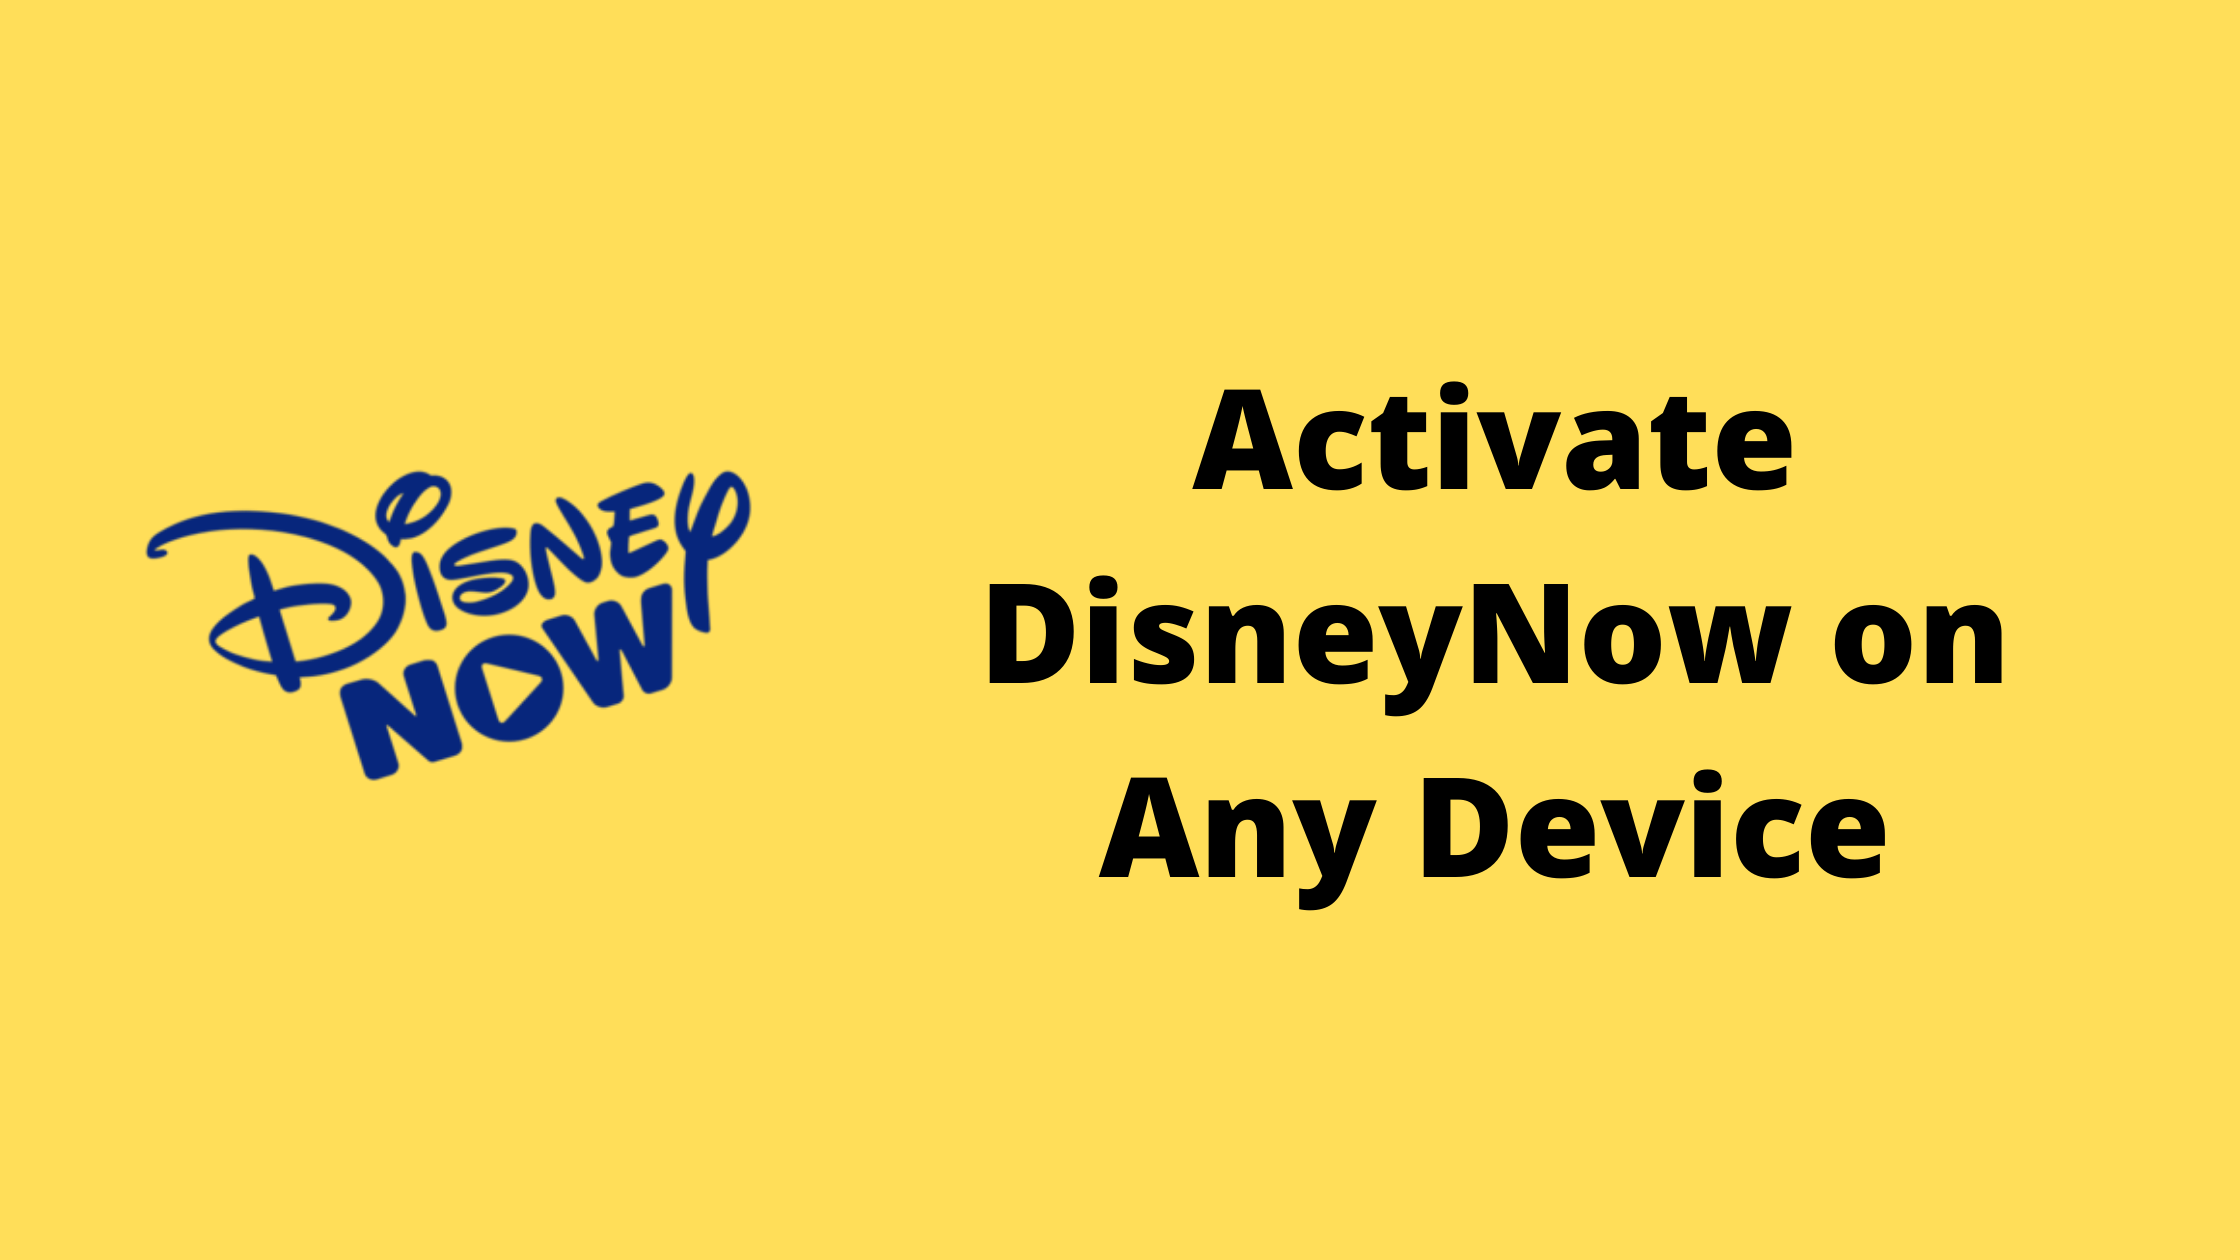 Activate DisneyNow on Any Device